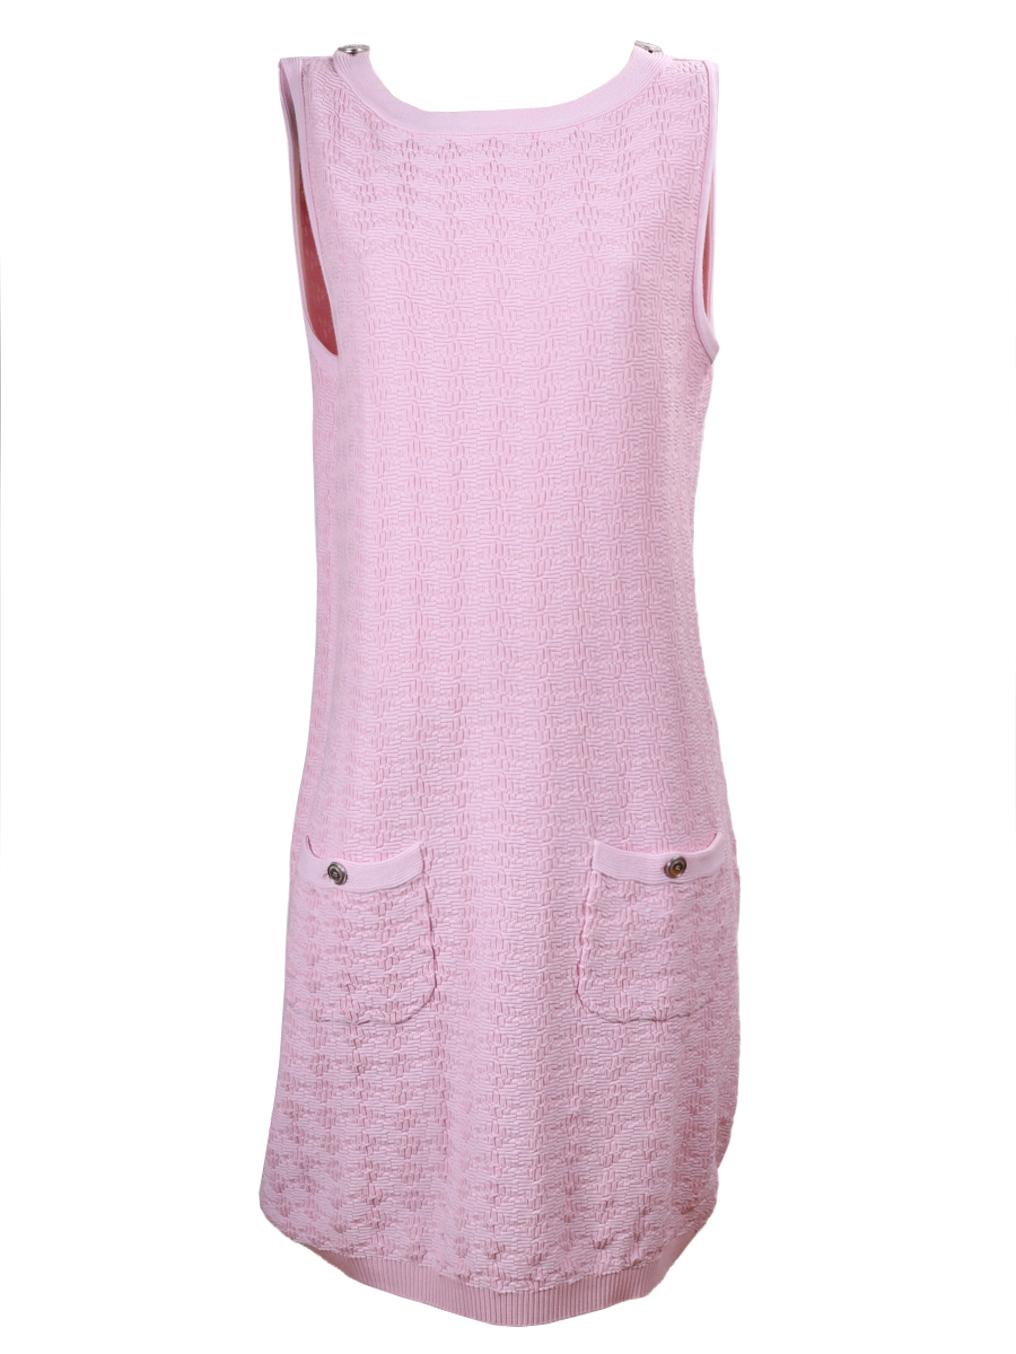 Chanel Pink Knit Sleeveless Dress - Preowned